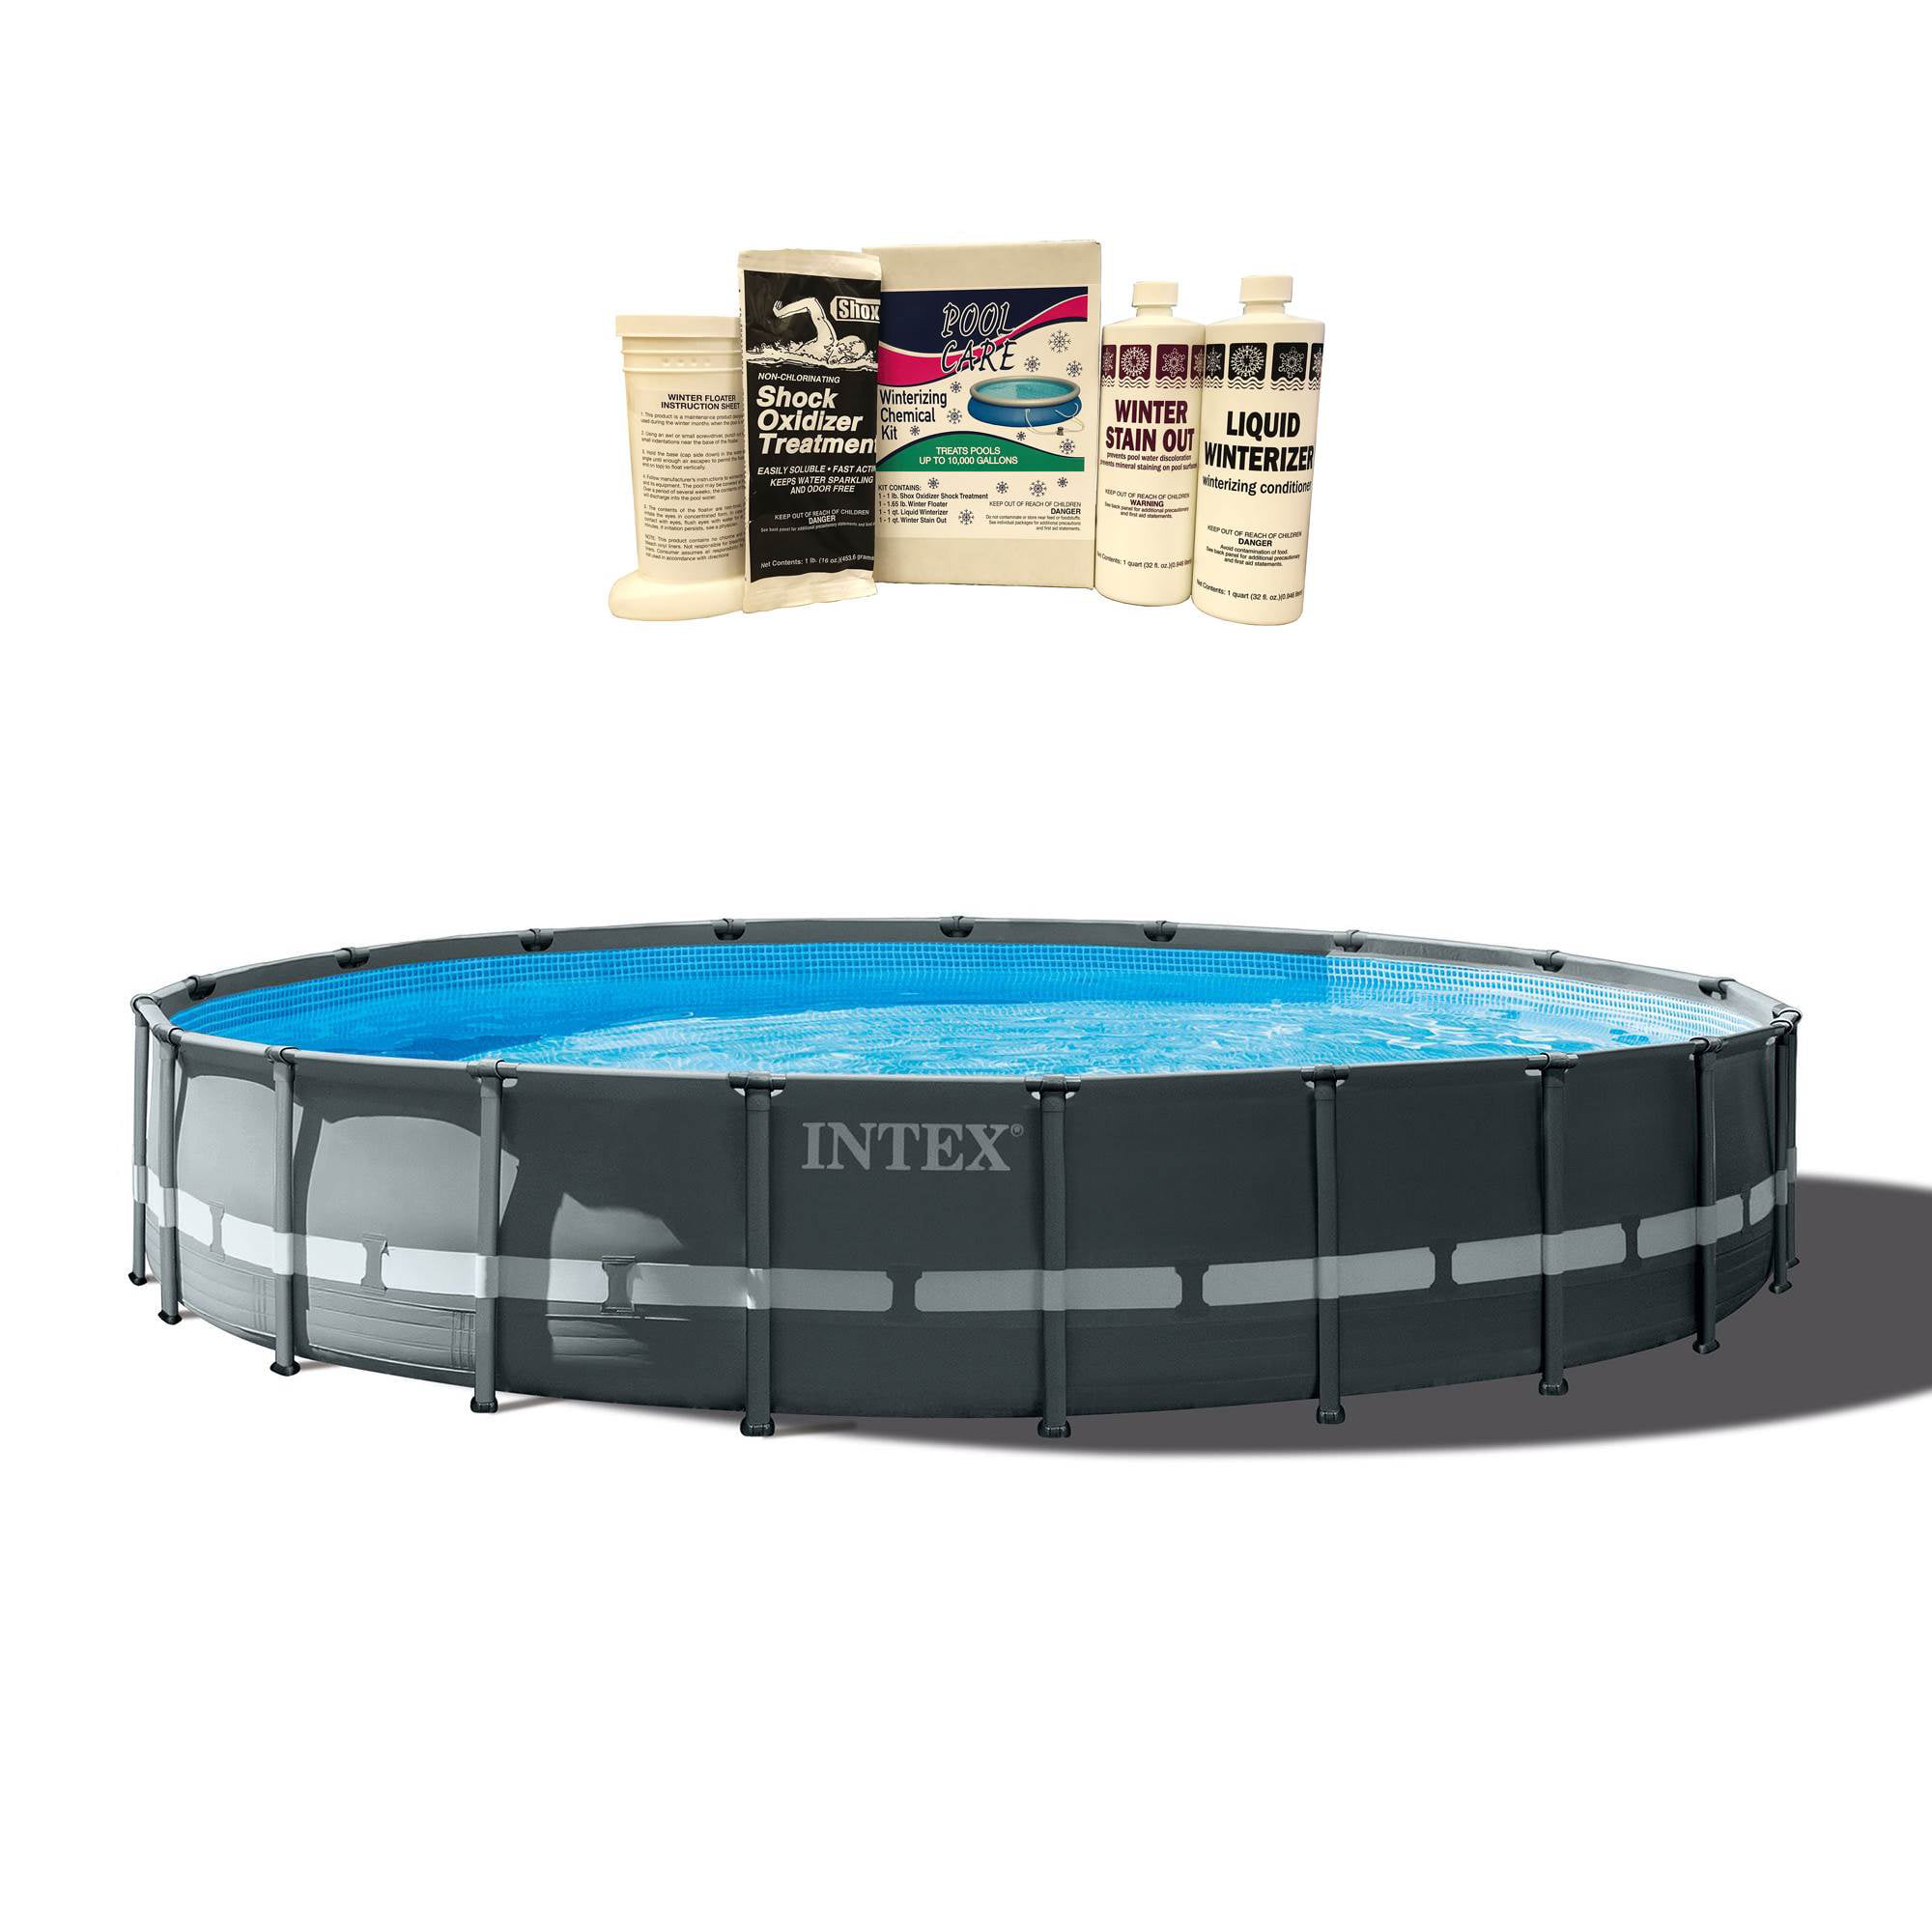 Pump & Winterizing Kit Details about   Intex 18ft x 52in Ultra XTR Round Frame Swimming Pool 